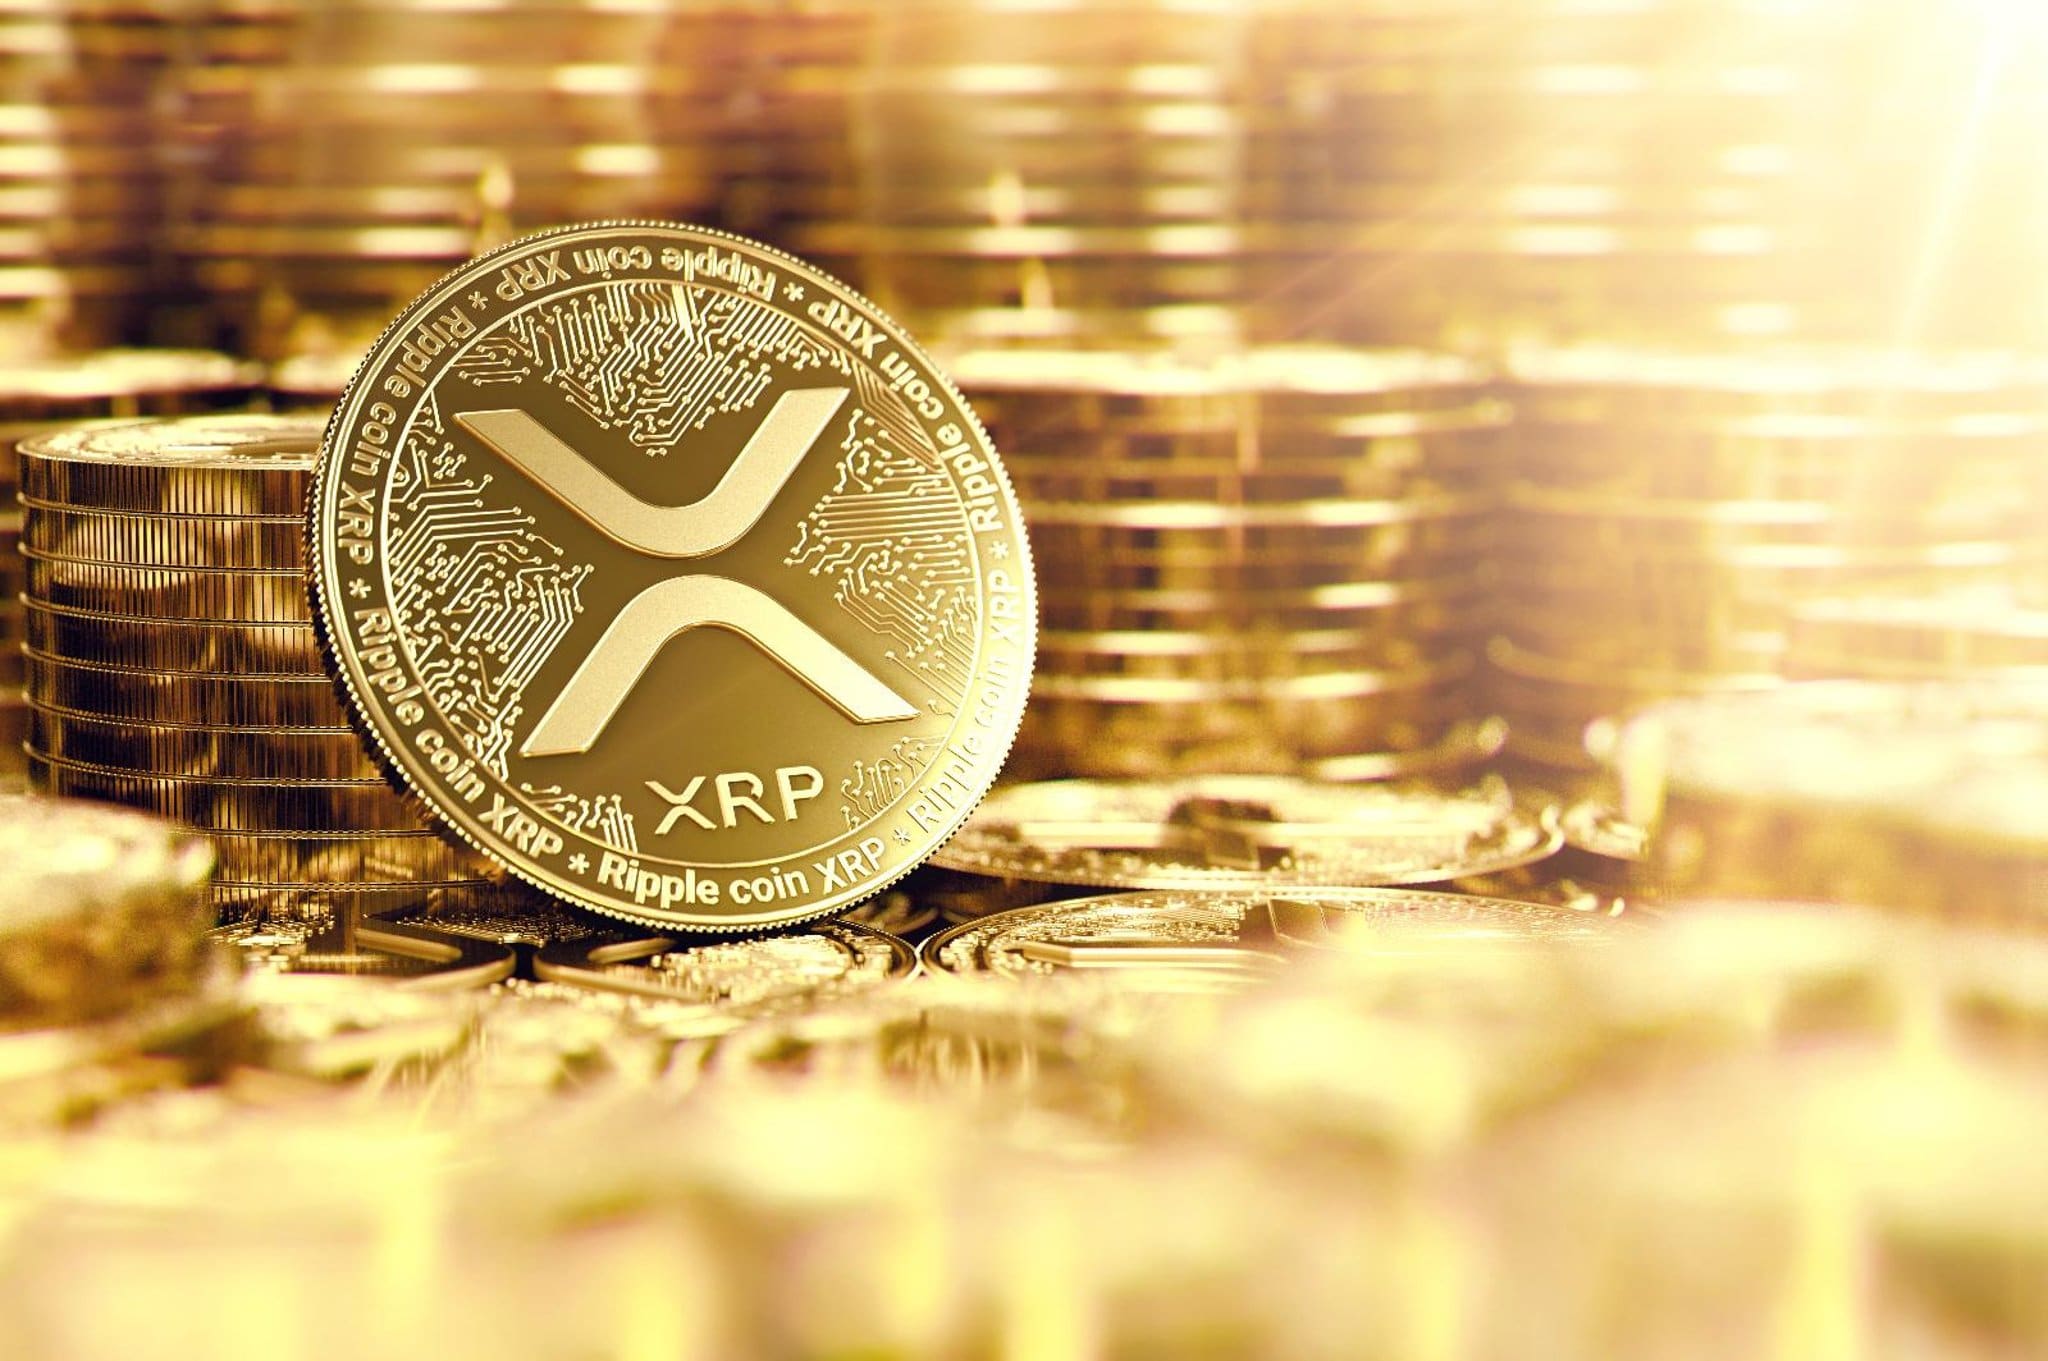 XRP Price Prediction for 2022 2023 2024 2025 - 2030